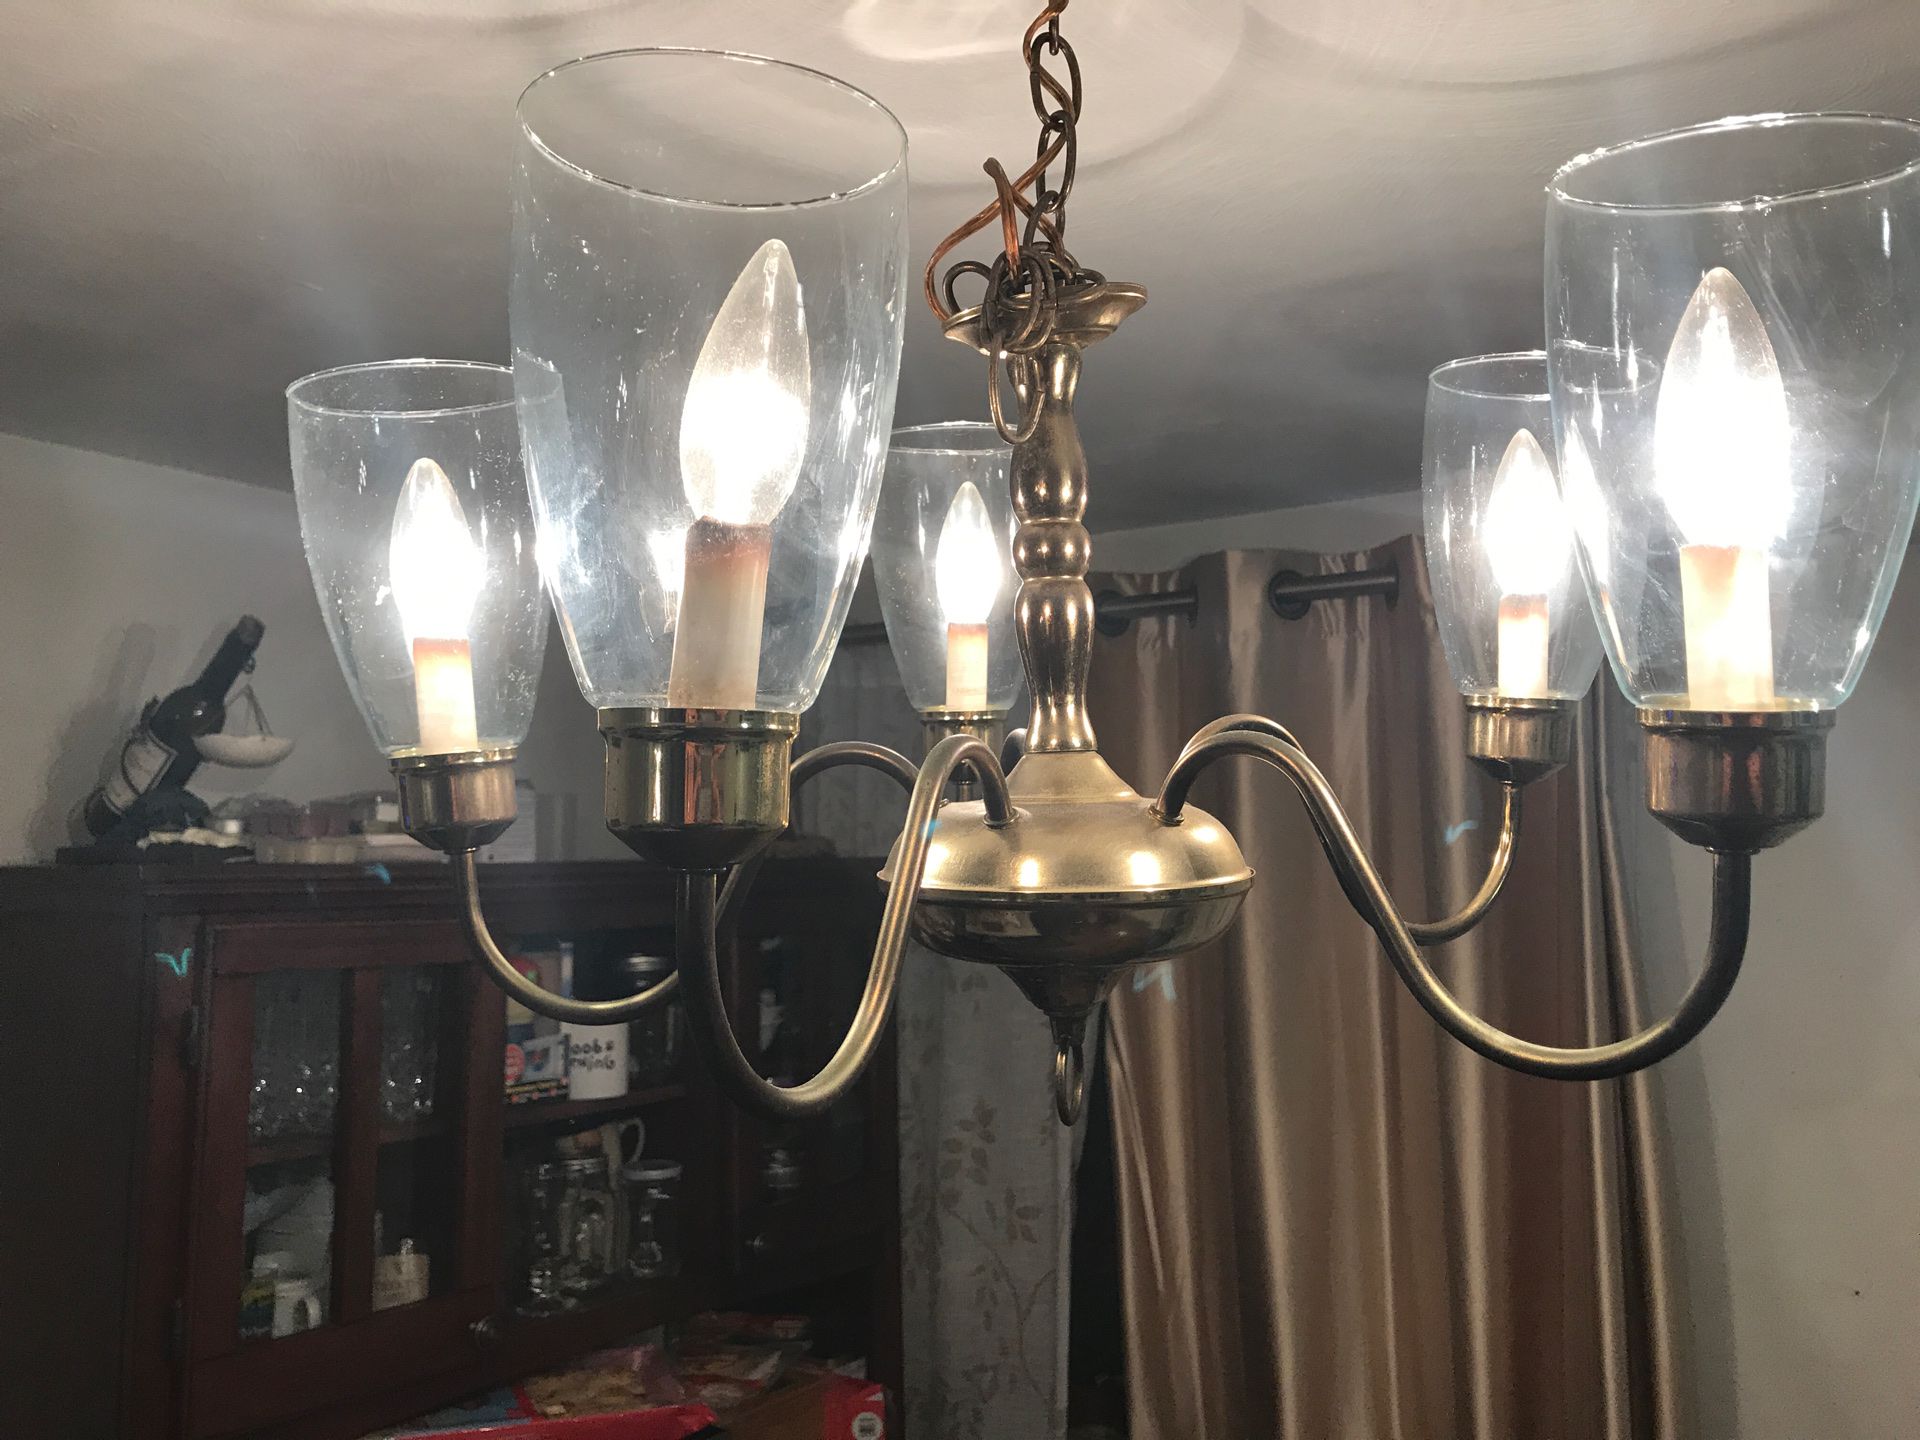 Chandelier for sale $9/-